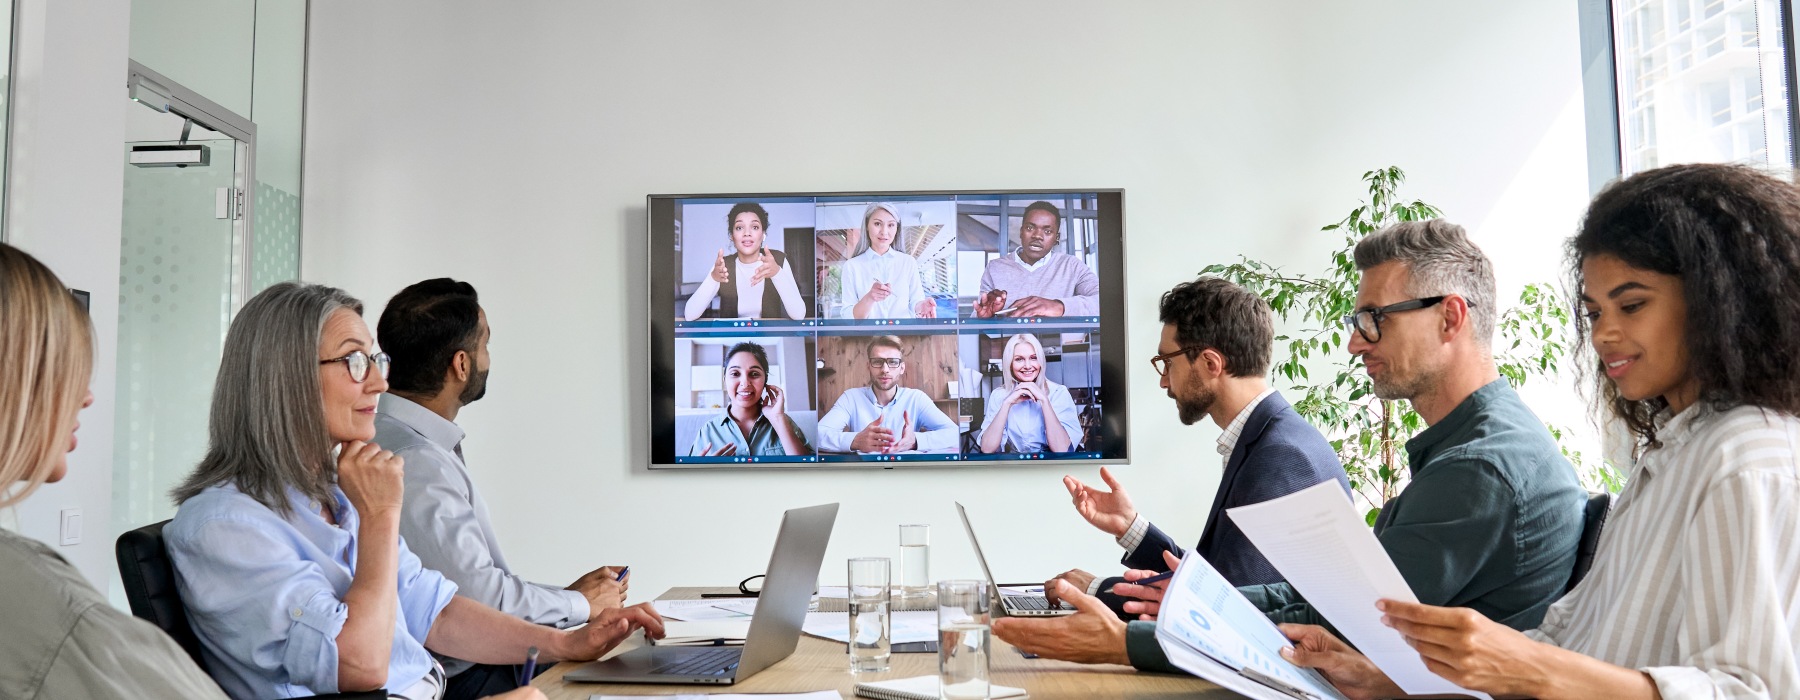 Group of coworkers in conference room participating in virtual meeting